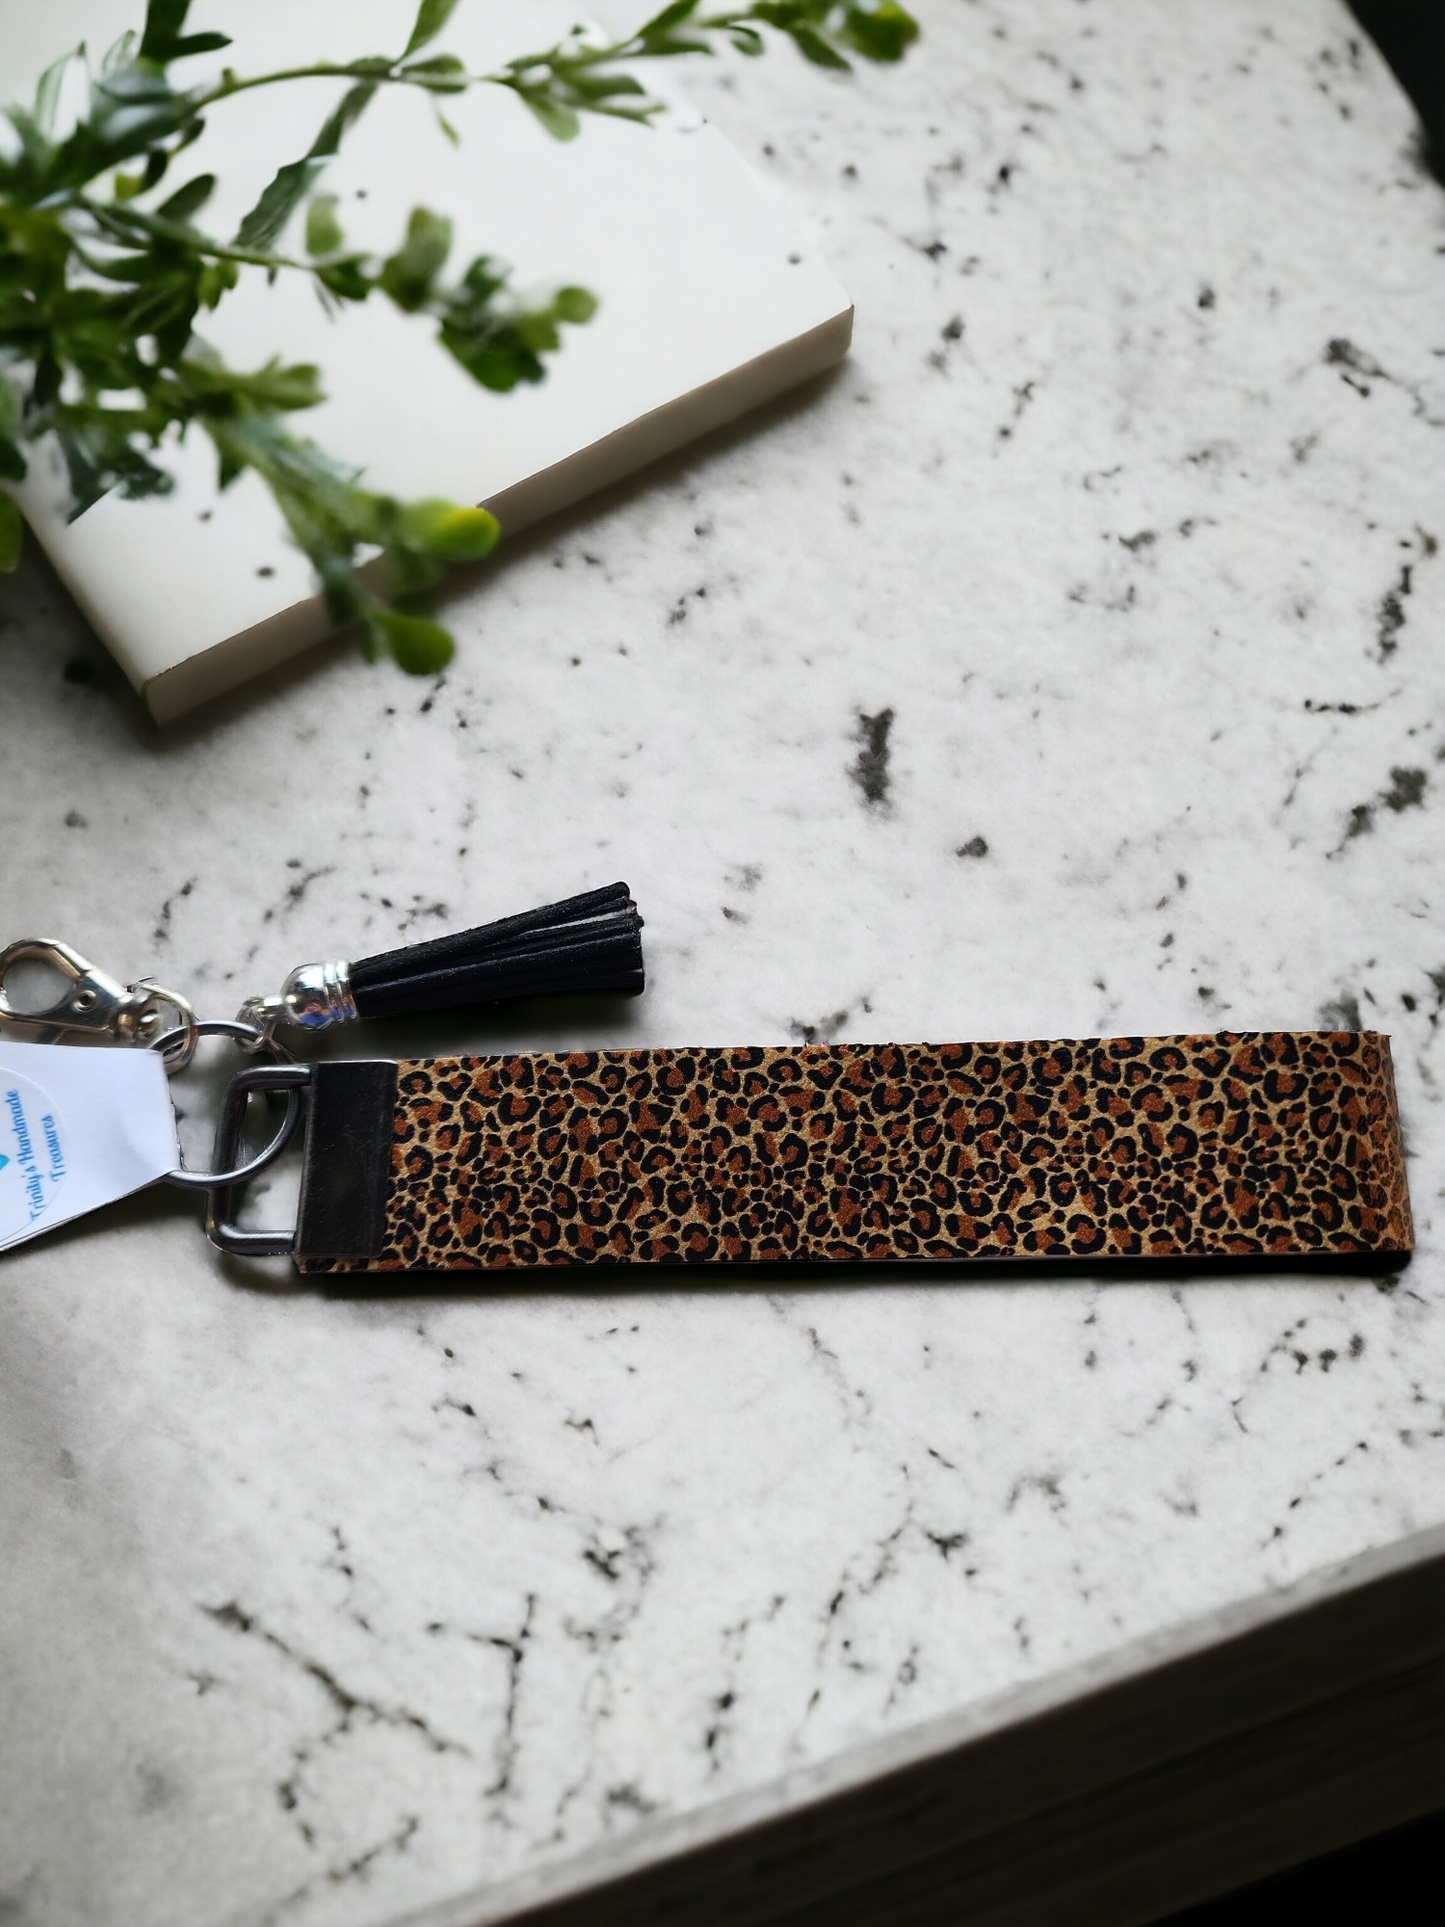 Leather Key Fobs